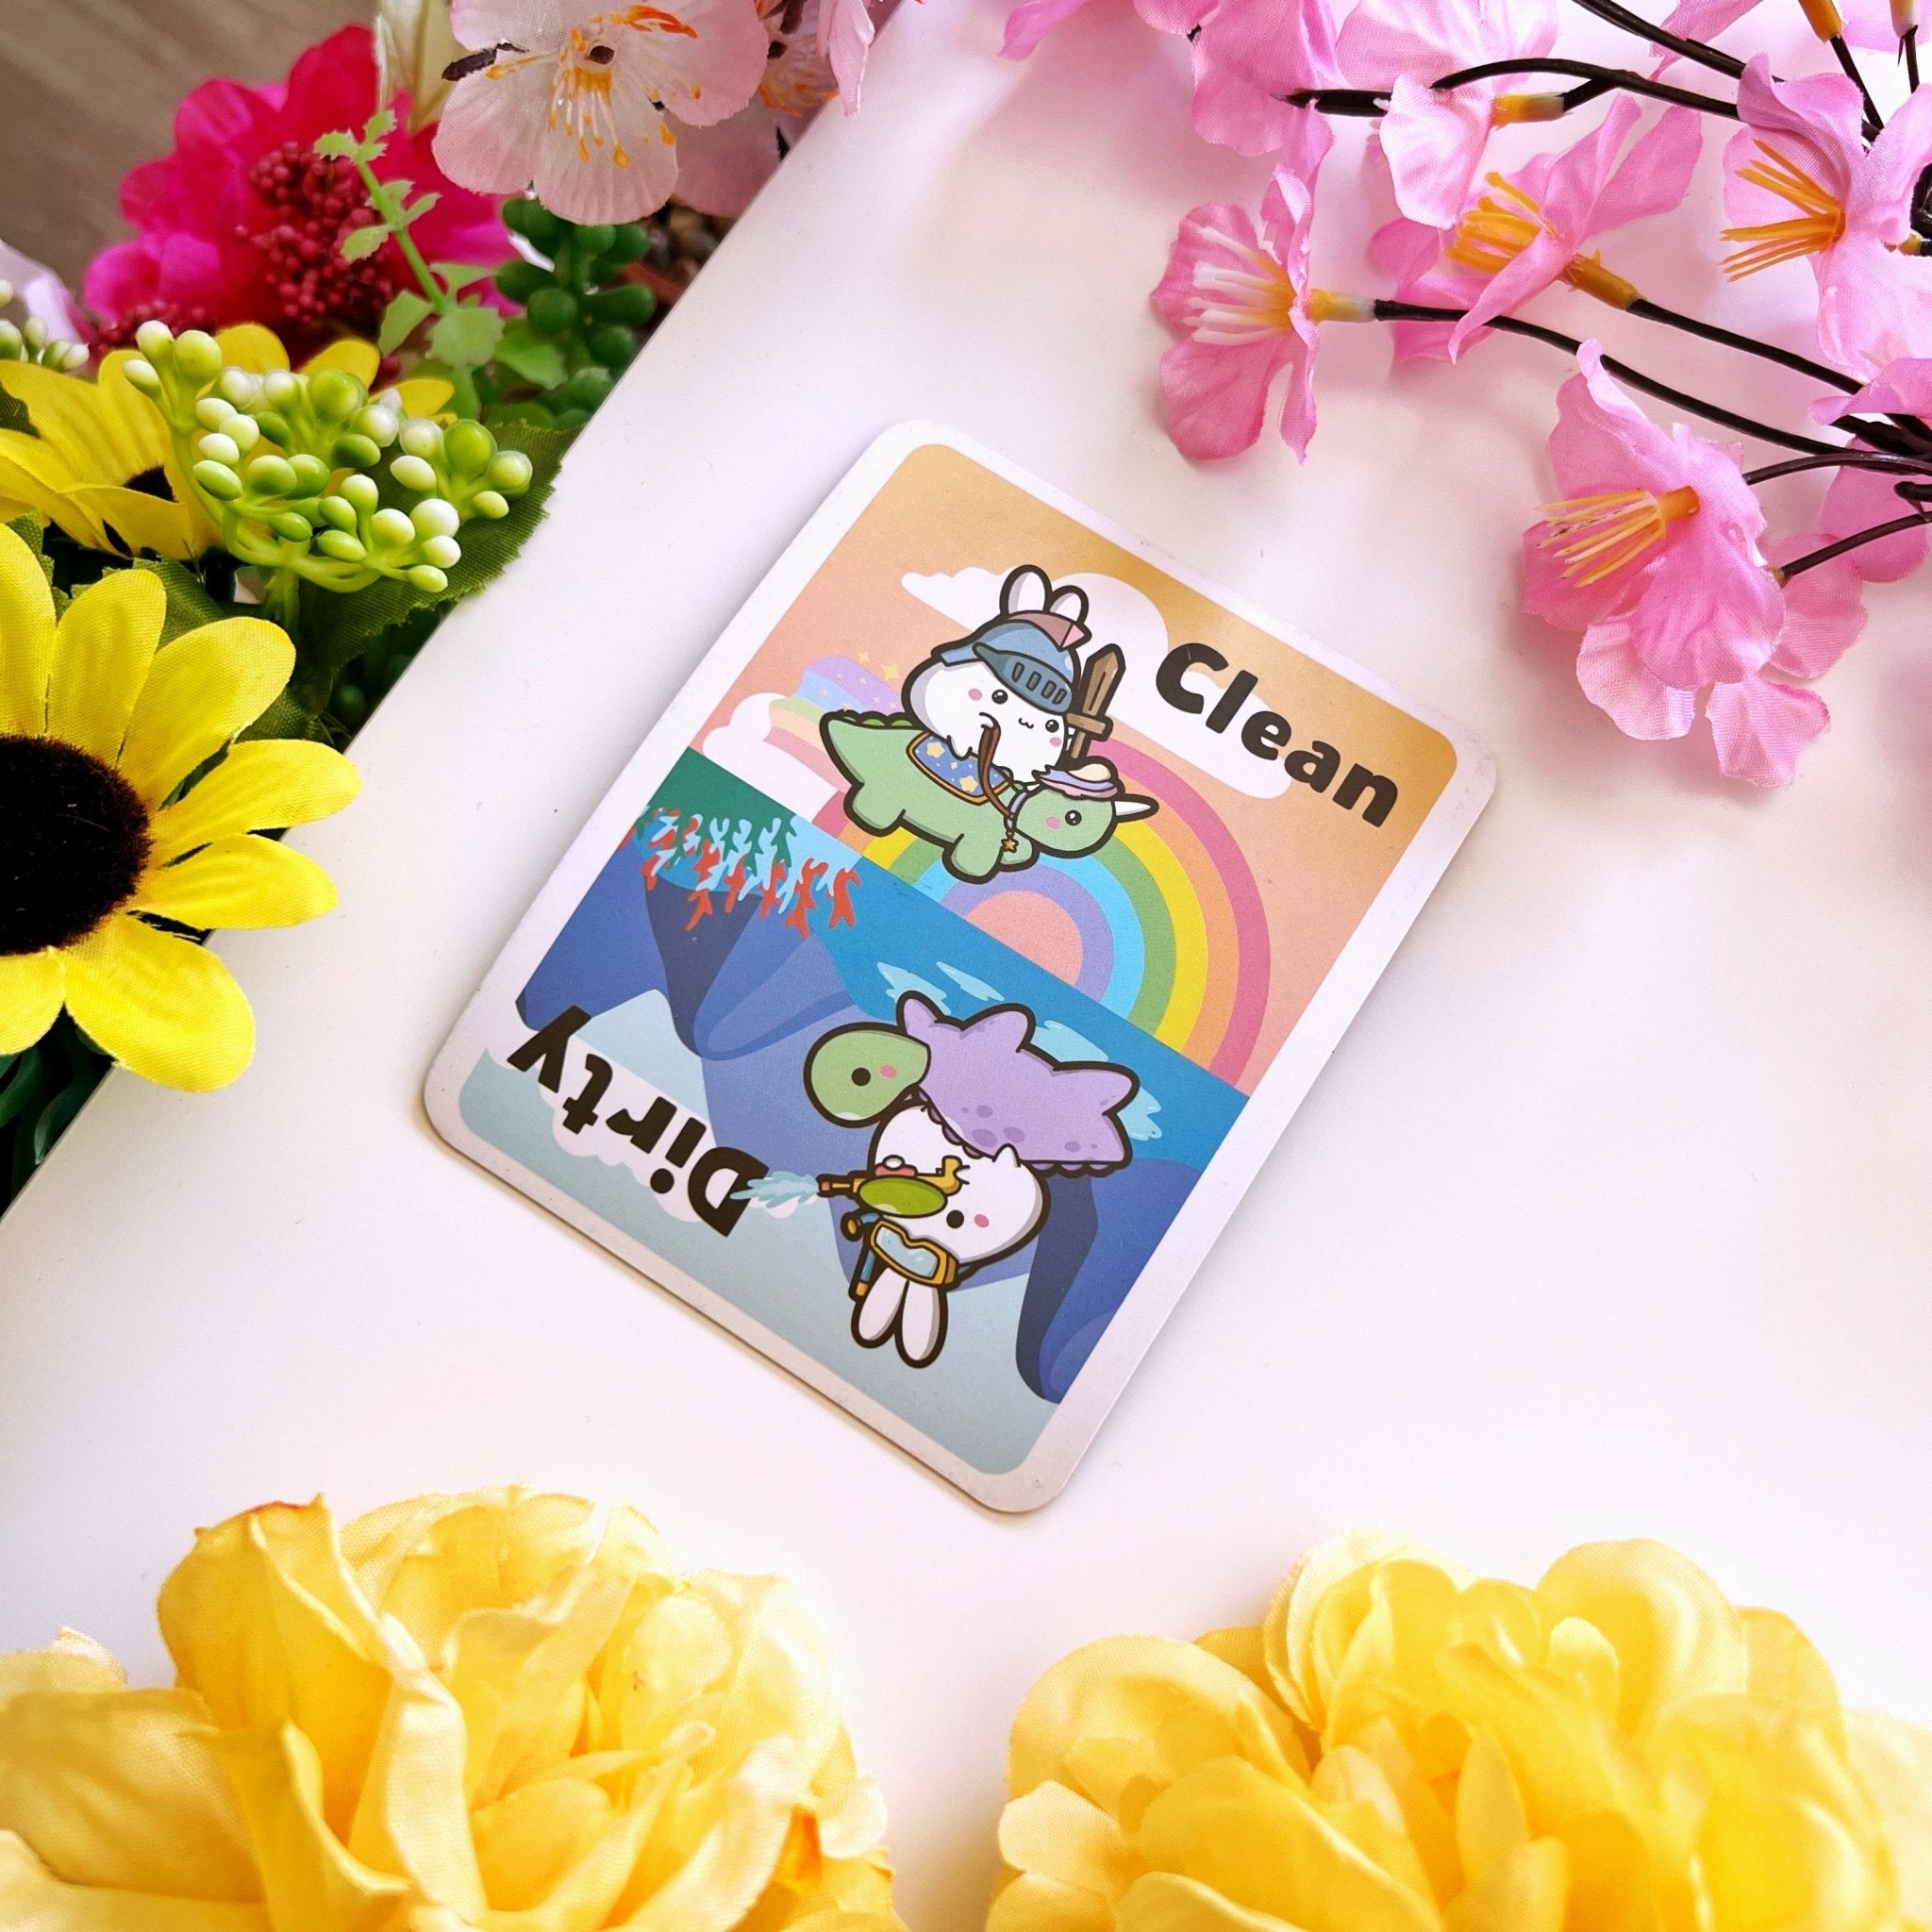 Dishwasher Magnet - Lil' Mythical Creatures - SumLilThings